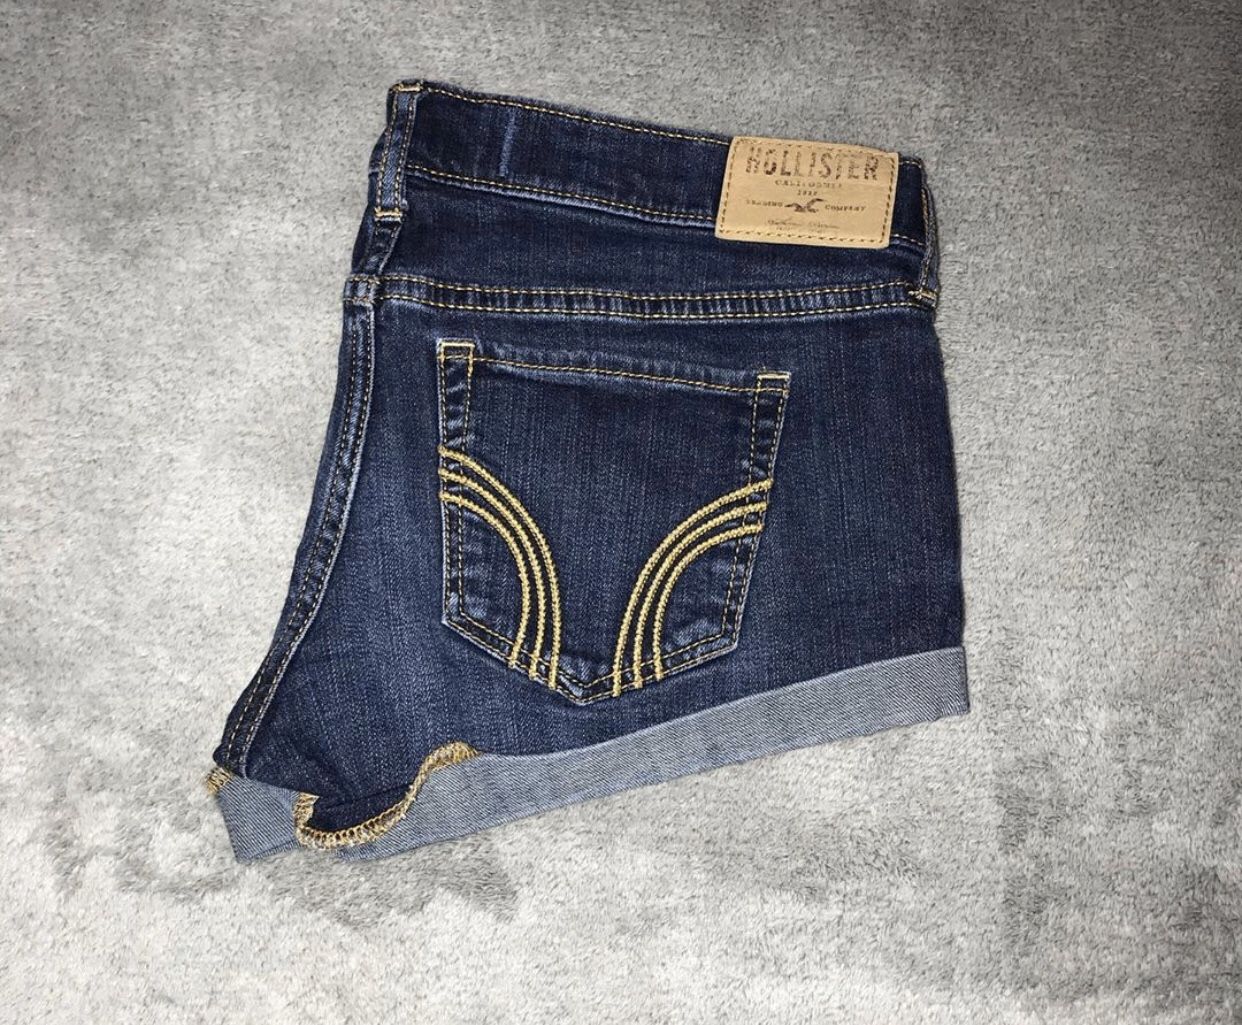 hollister shorts size 3s low rise